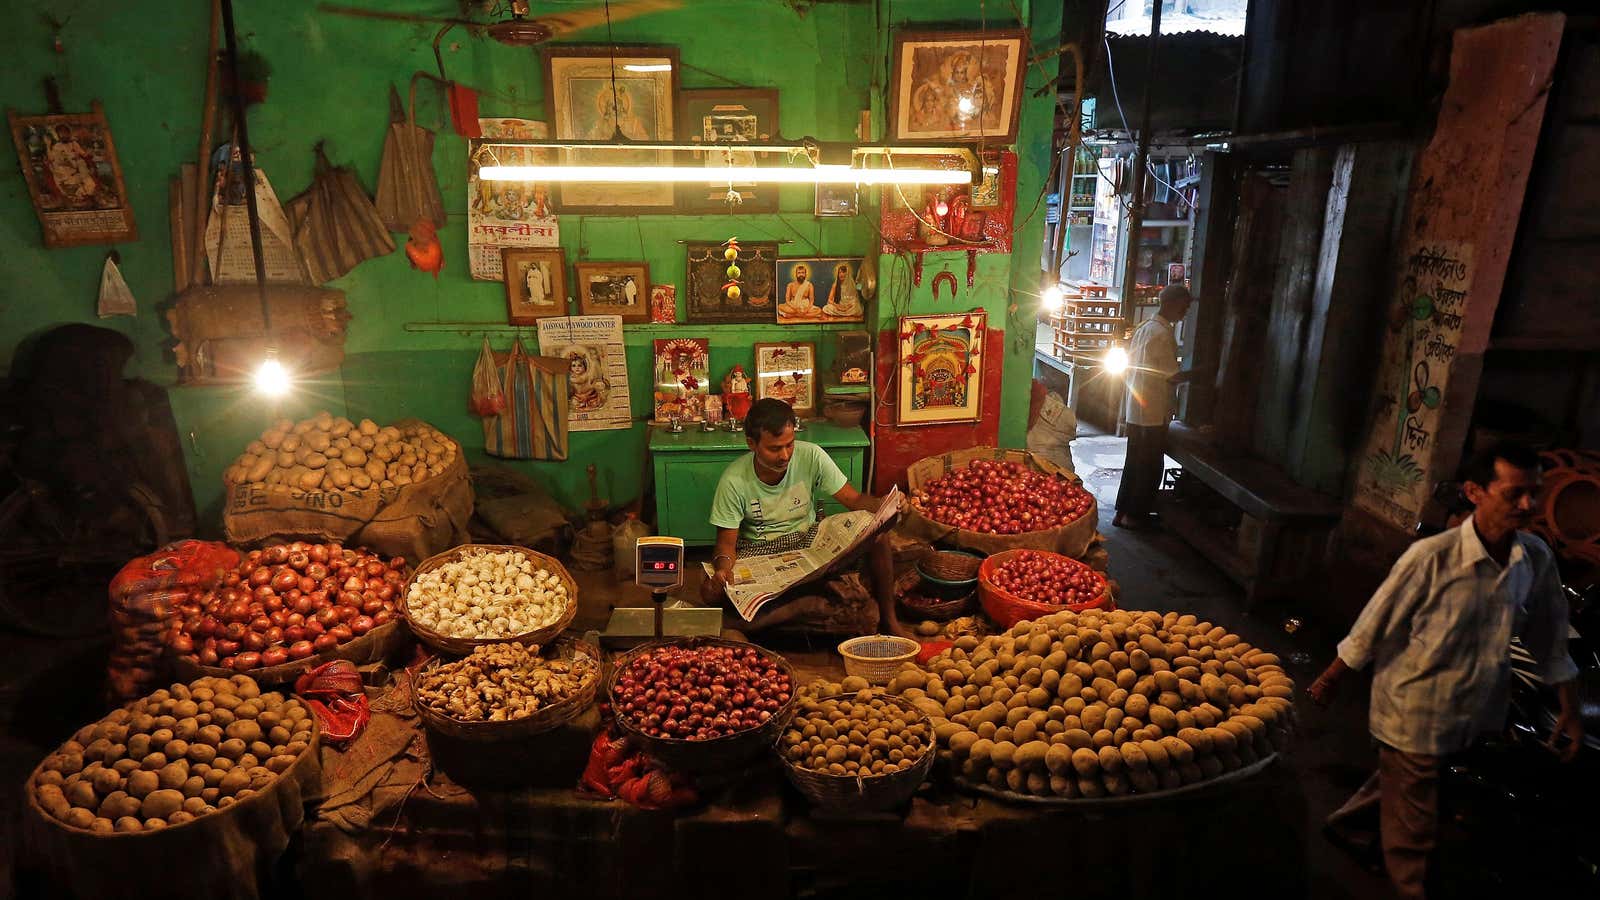 India’s inflation rate in March 2022 was the highest in 17 months